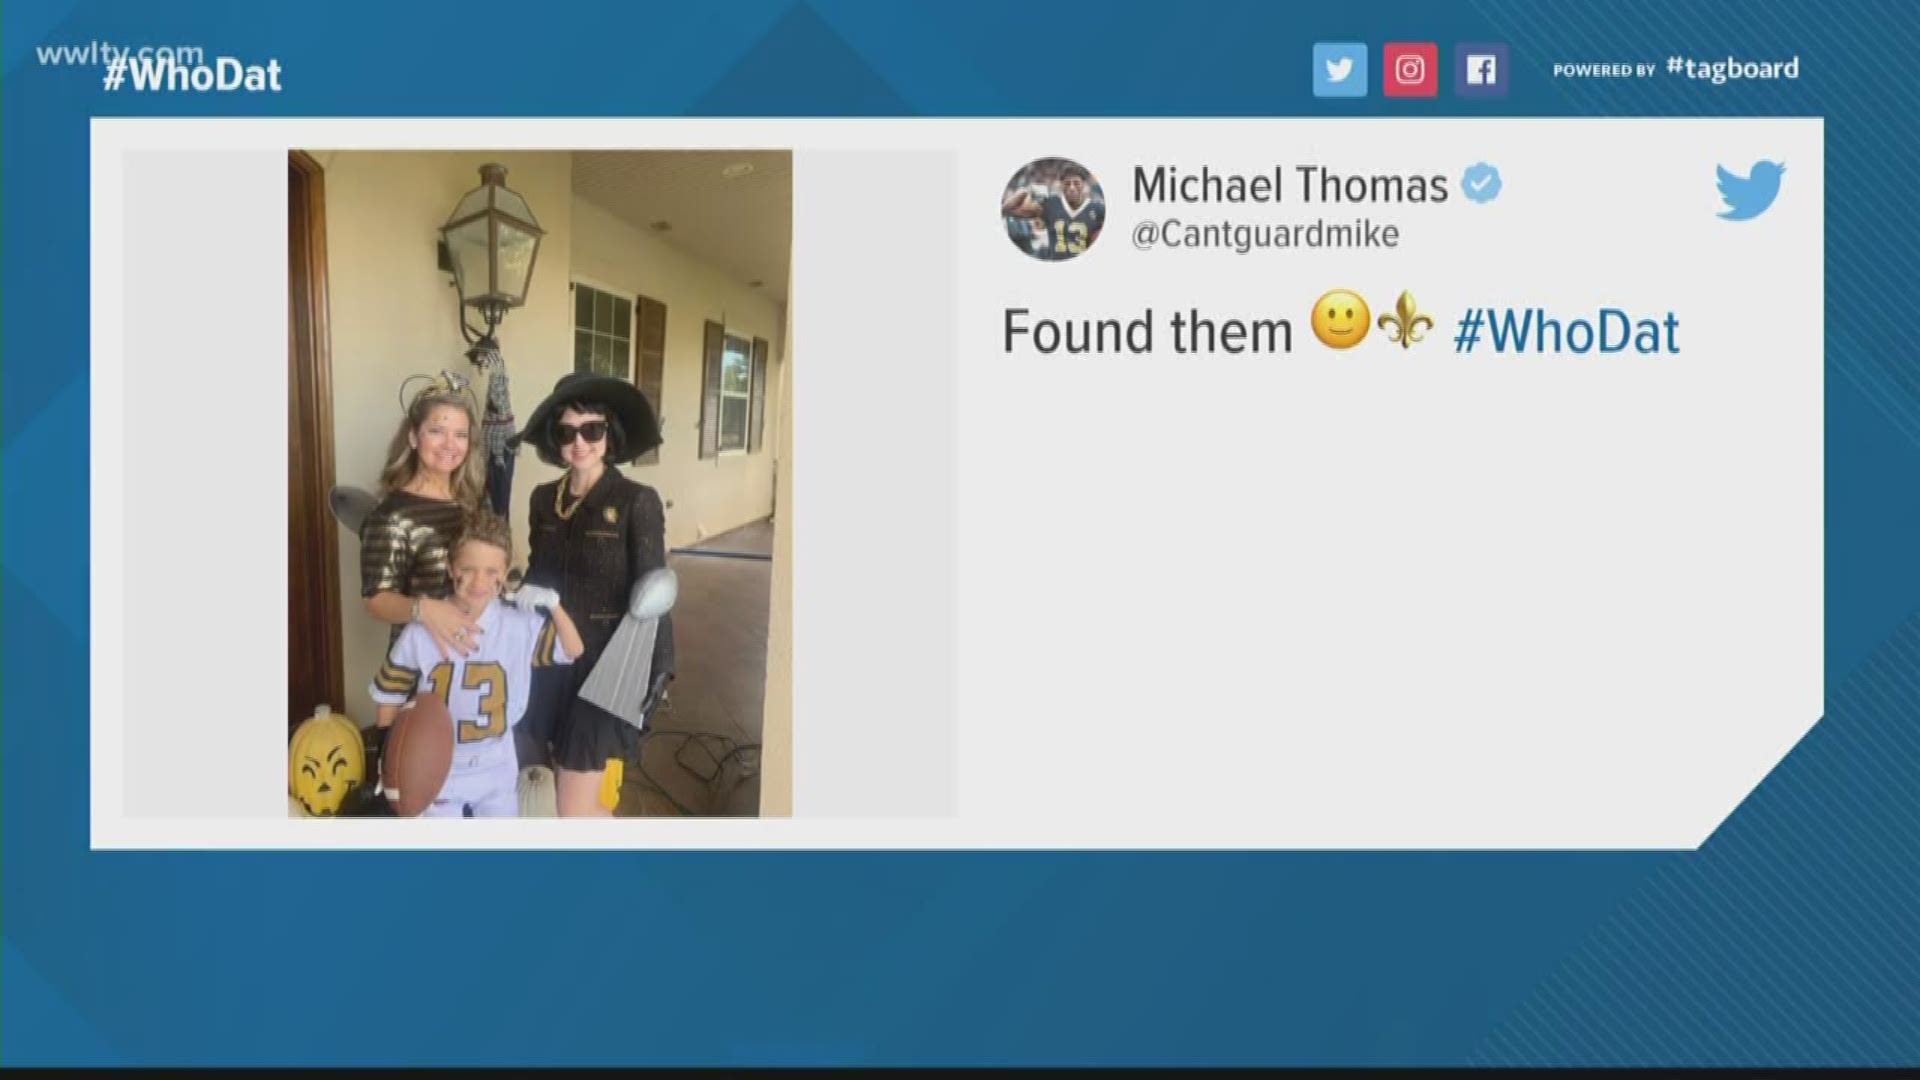 The Saints receiver was so impressed with the costumes that he sent out a request to find the family and give them tickets to the next game.